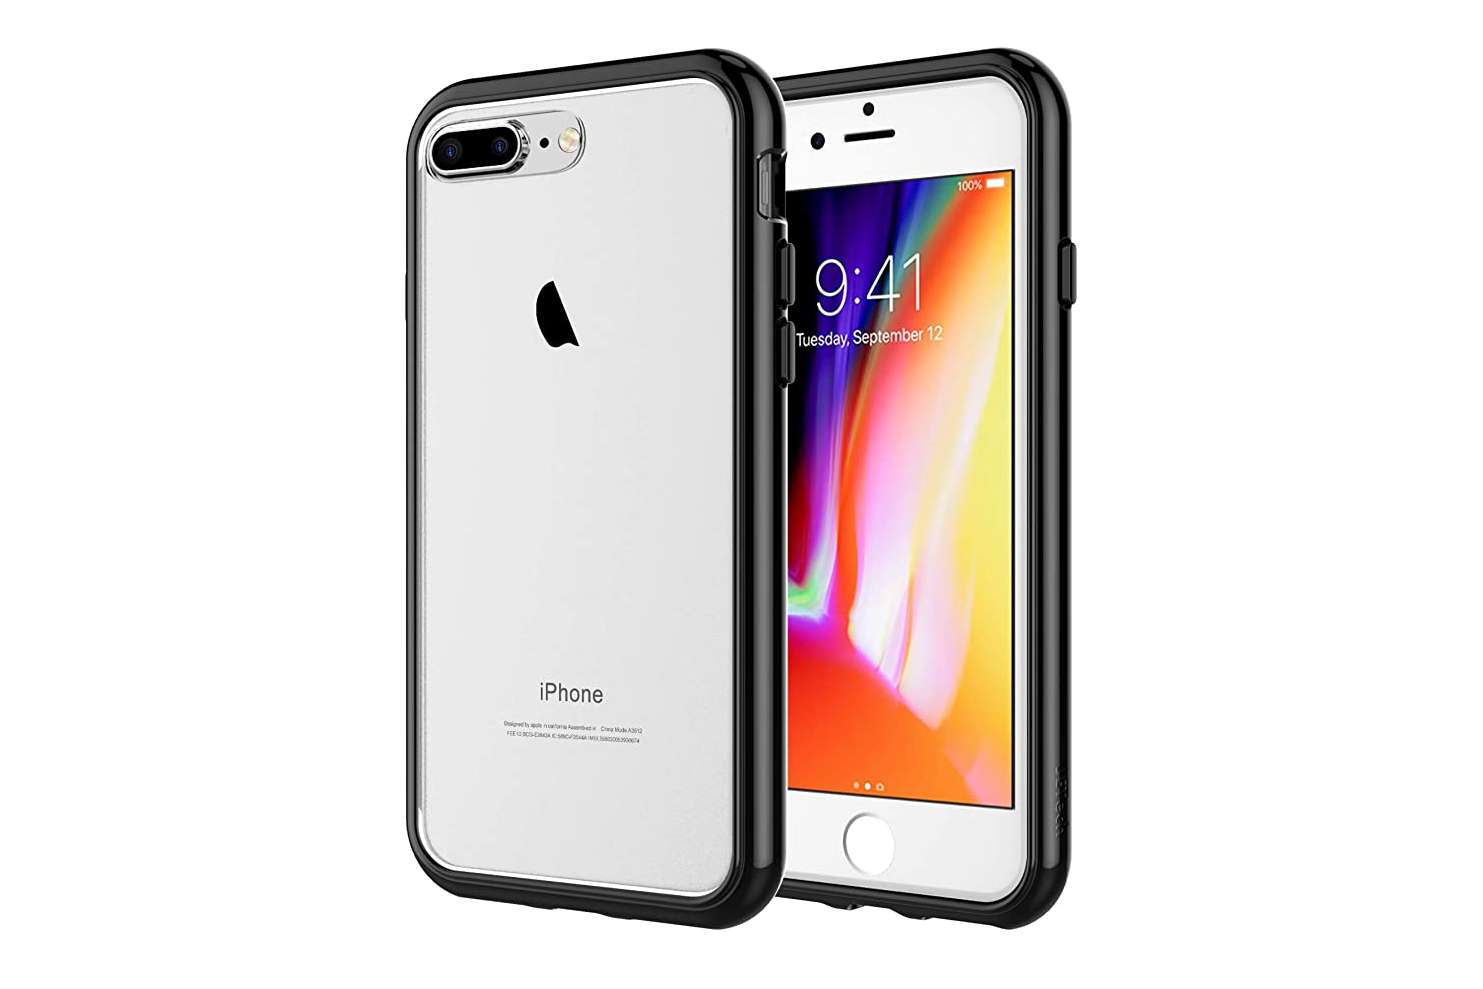 Silky-Soft Touch Full-Body Protective Case Shockproof Cover with Microfiber Lining 5.5 Inch Black iPhone 8 Plus JETech Silicone Case for iPhone 7 Plus 